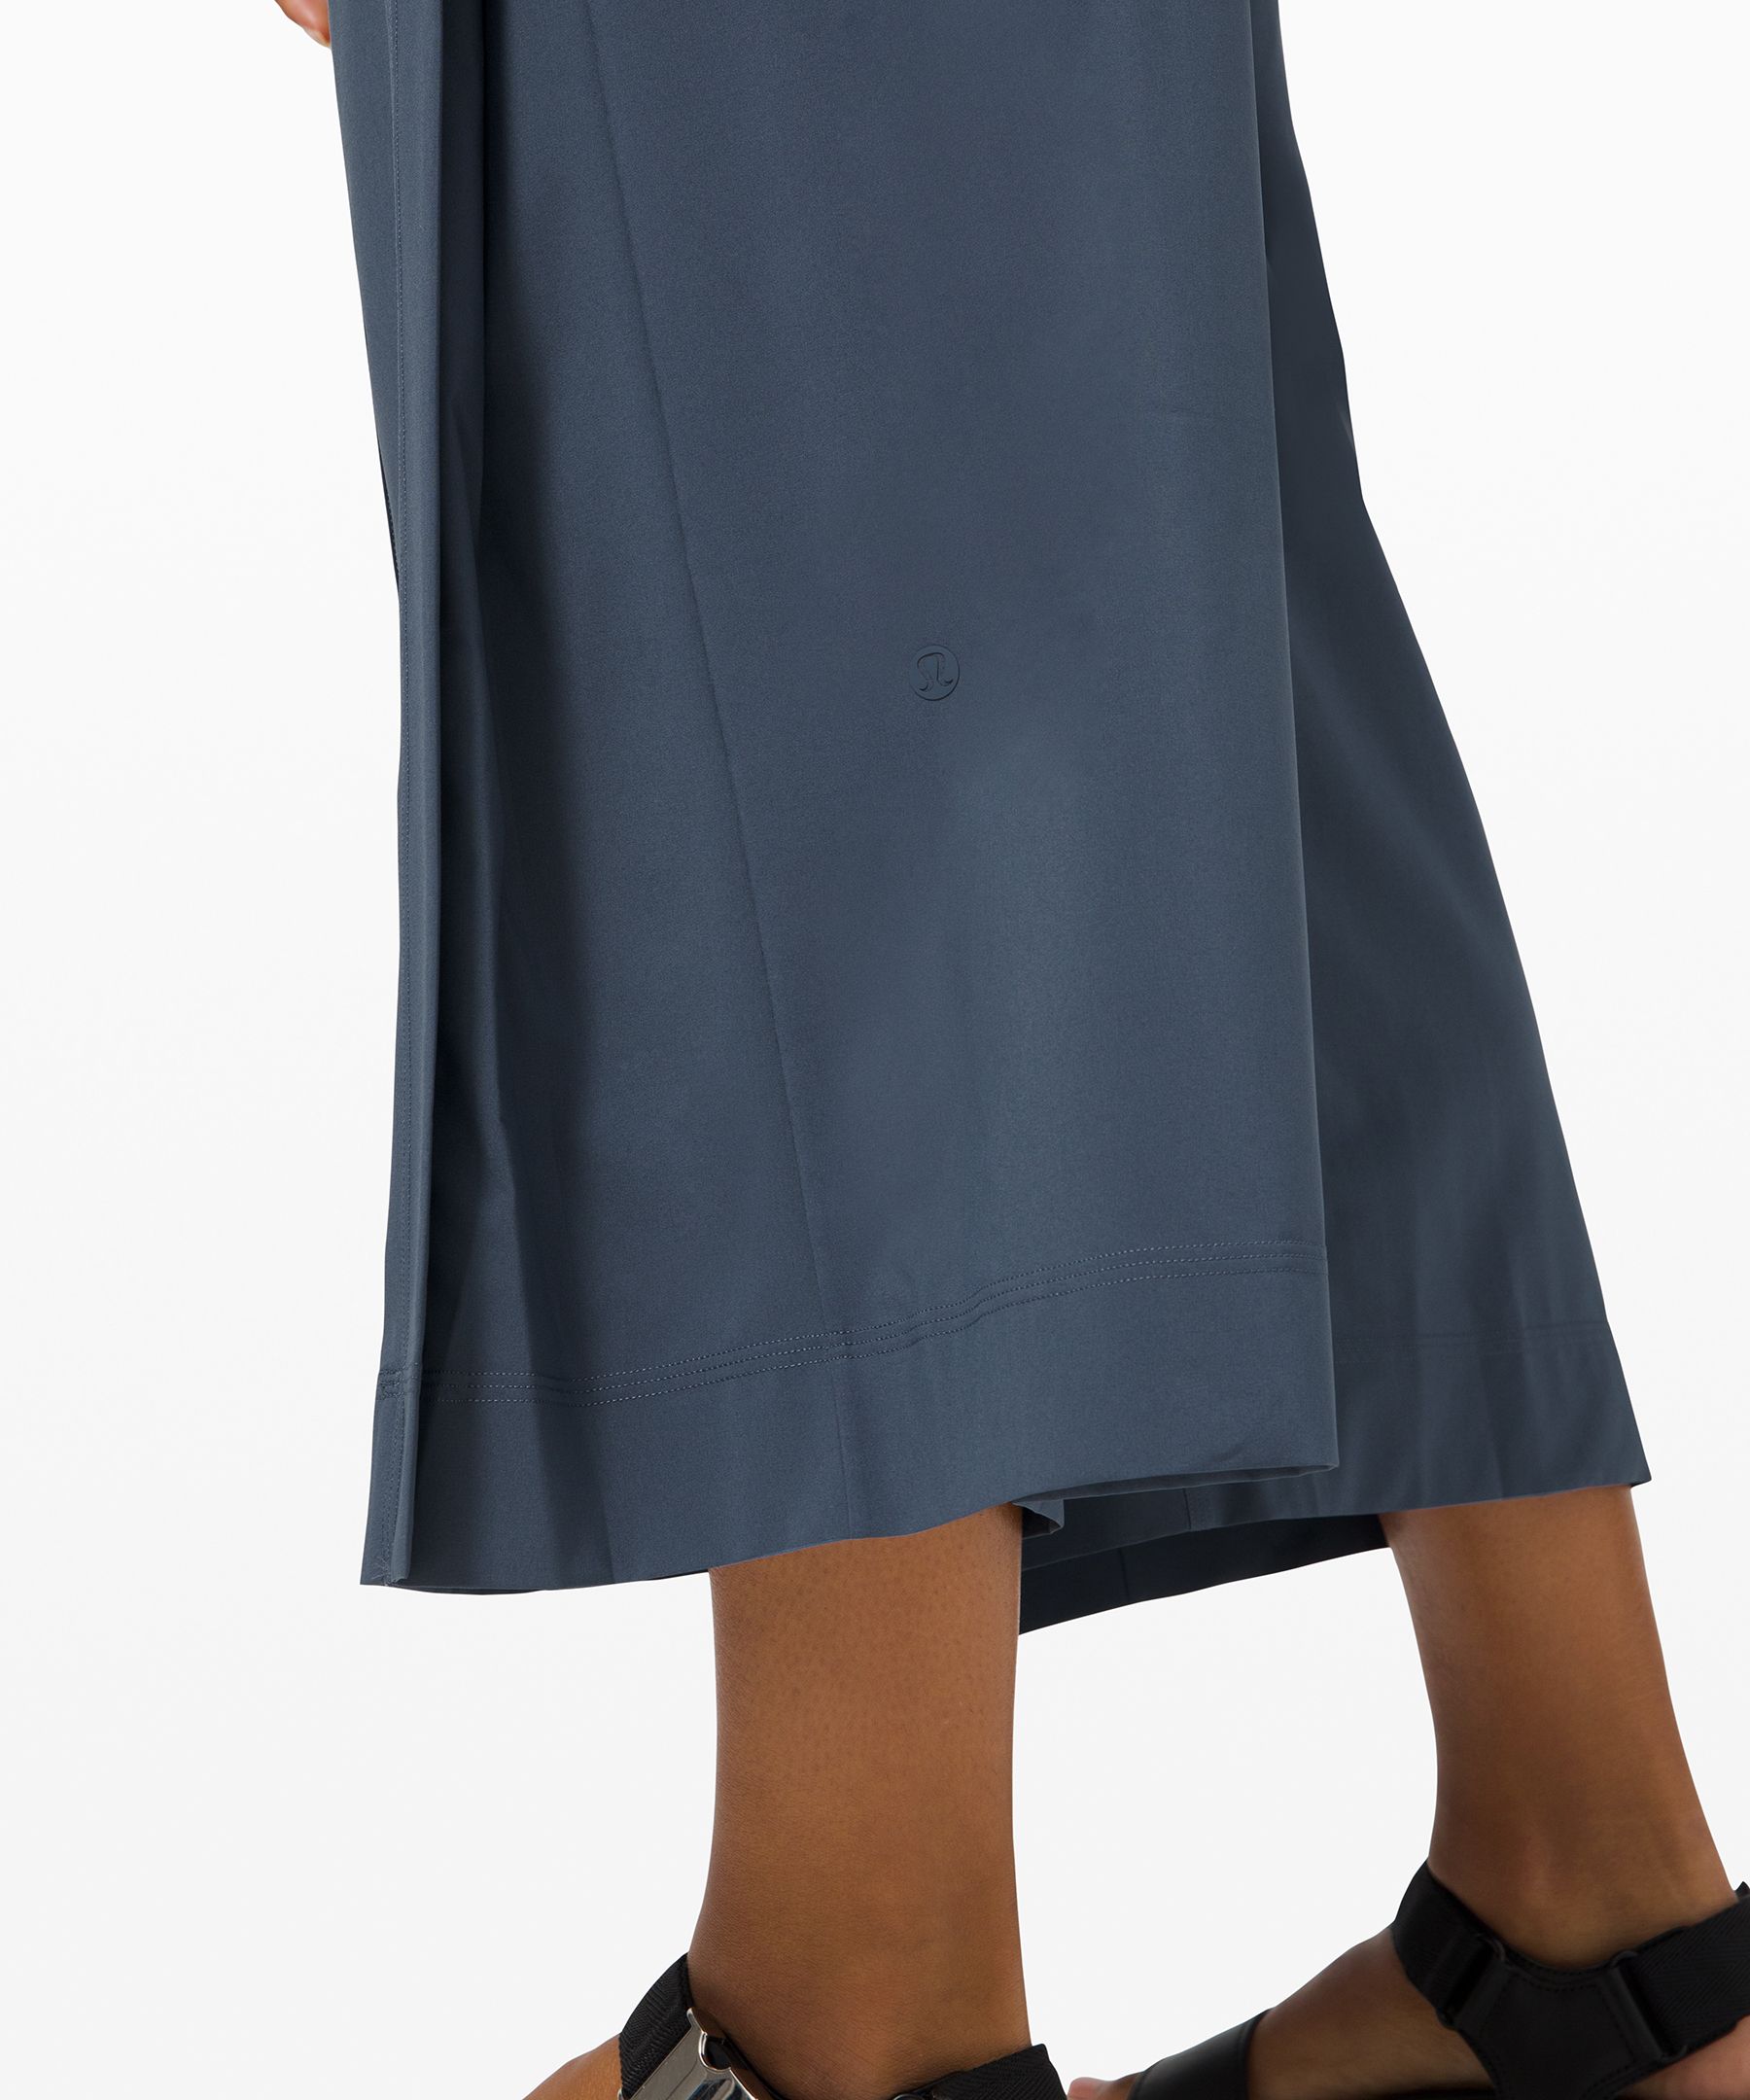 Another lulu for work outfit! Wanderer culotte in navy with the